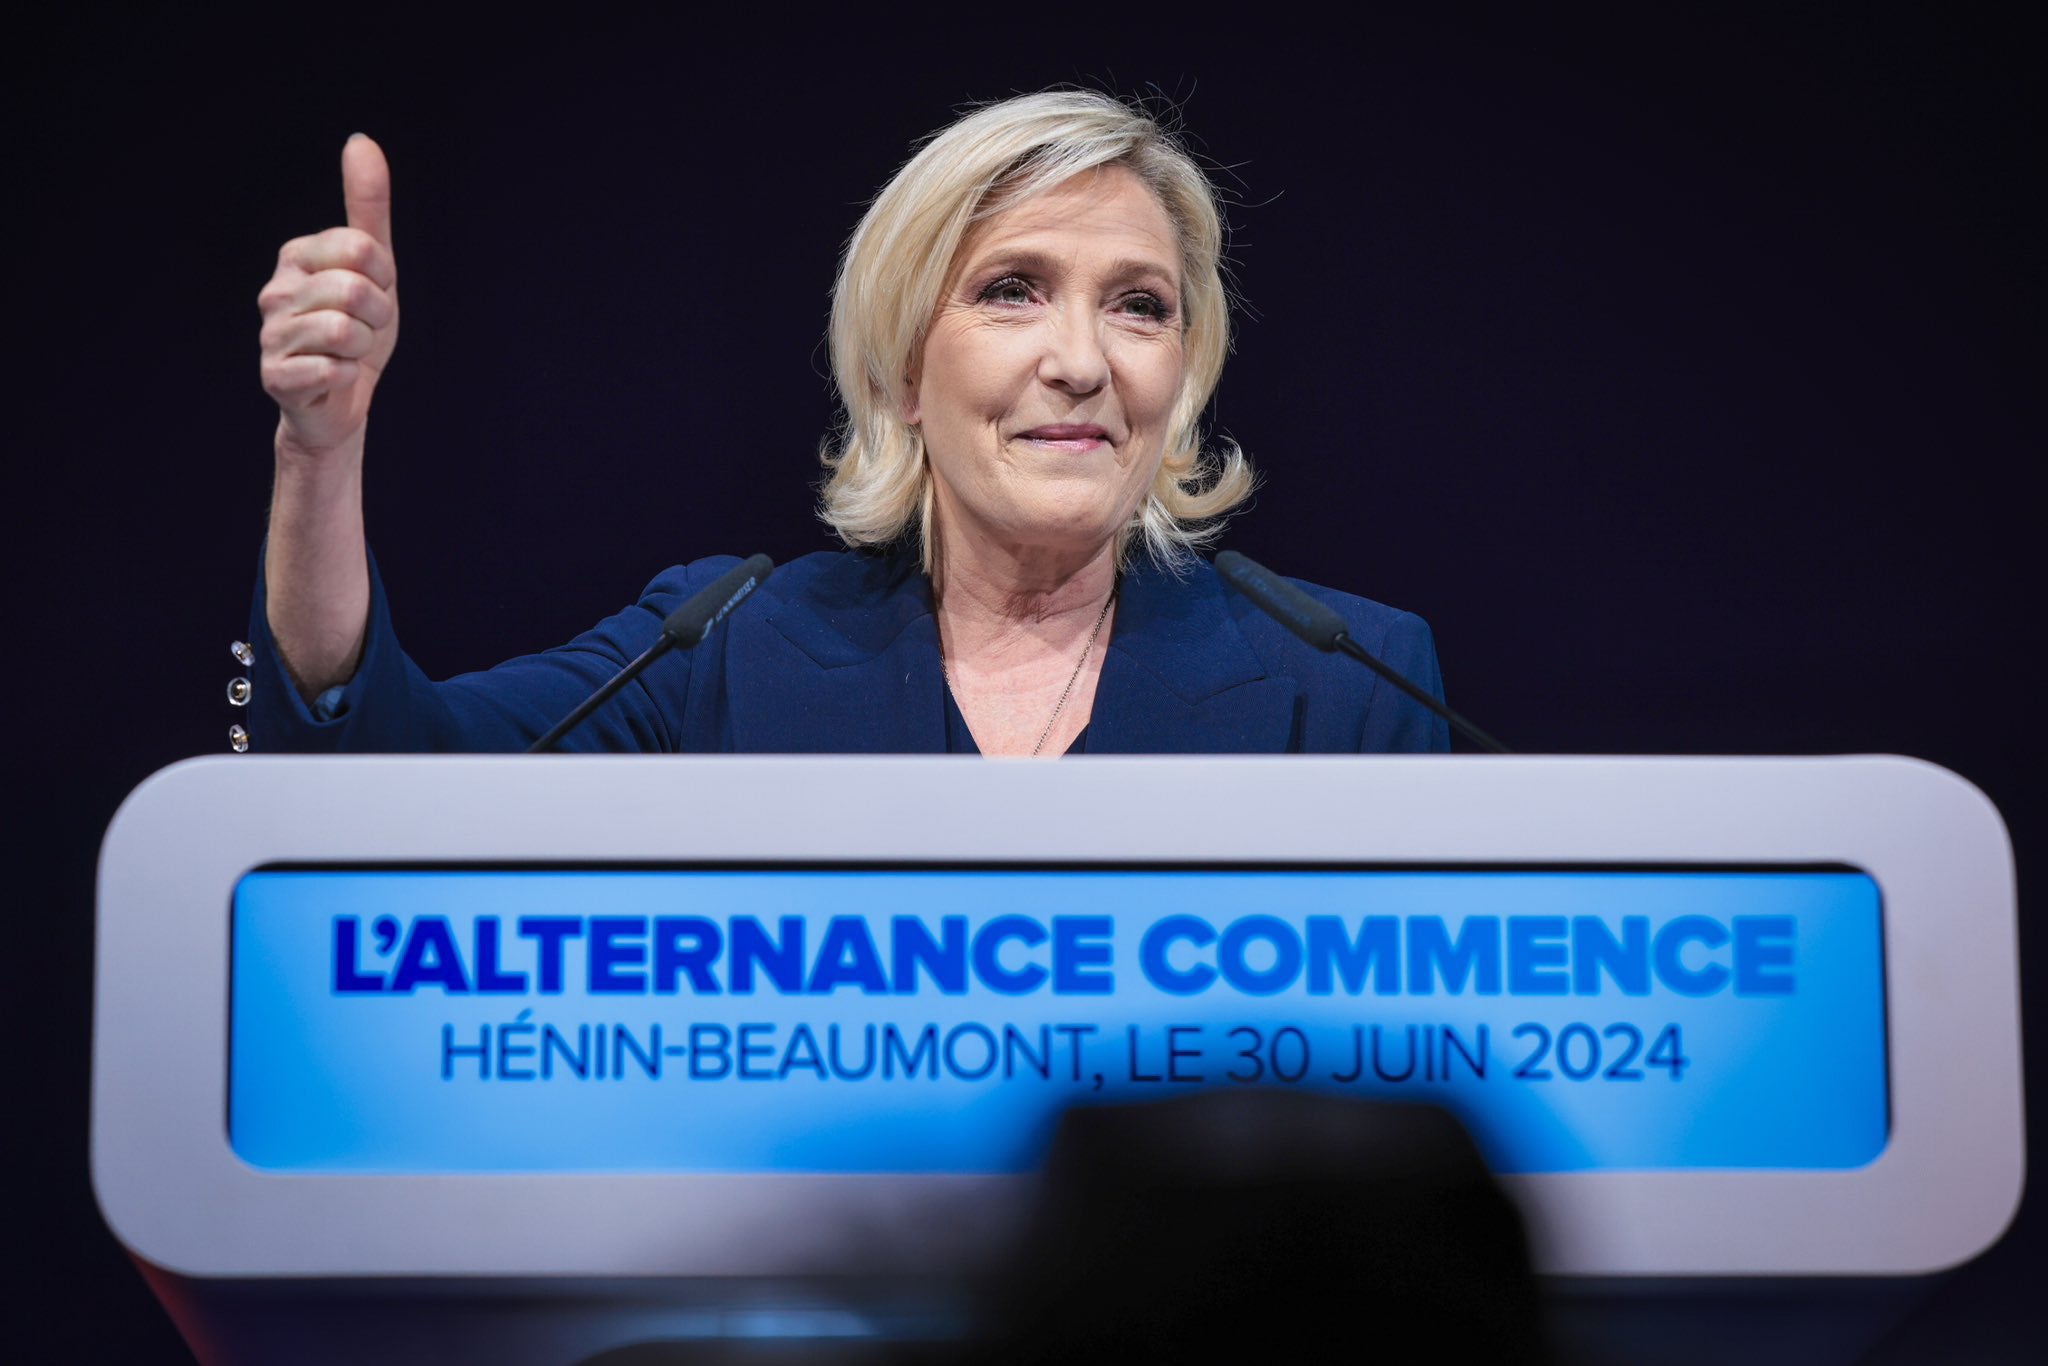 Following the report’s publication, Marine Le Pen’s far right party took the first round in voting